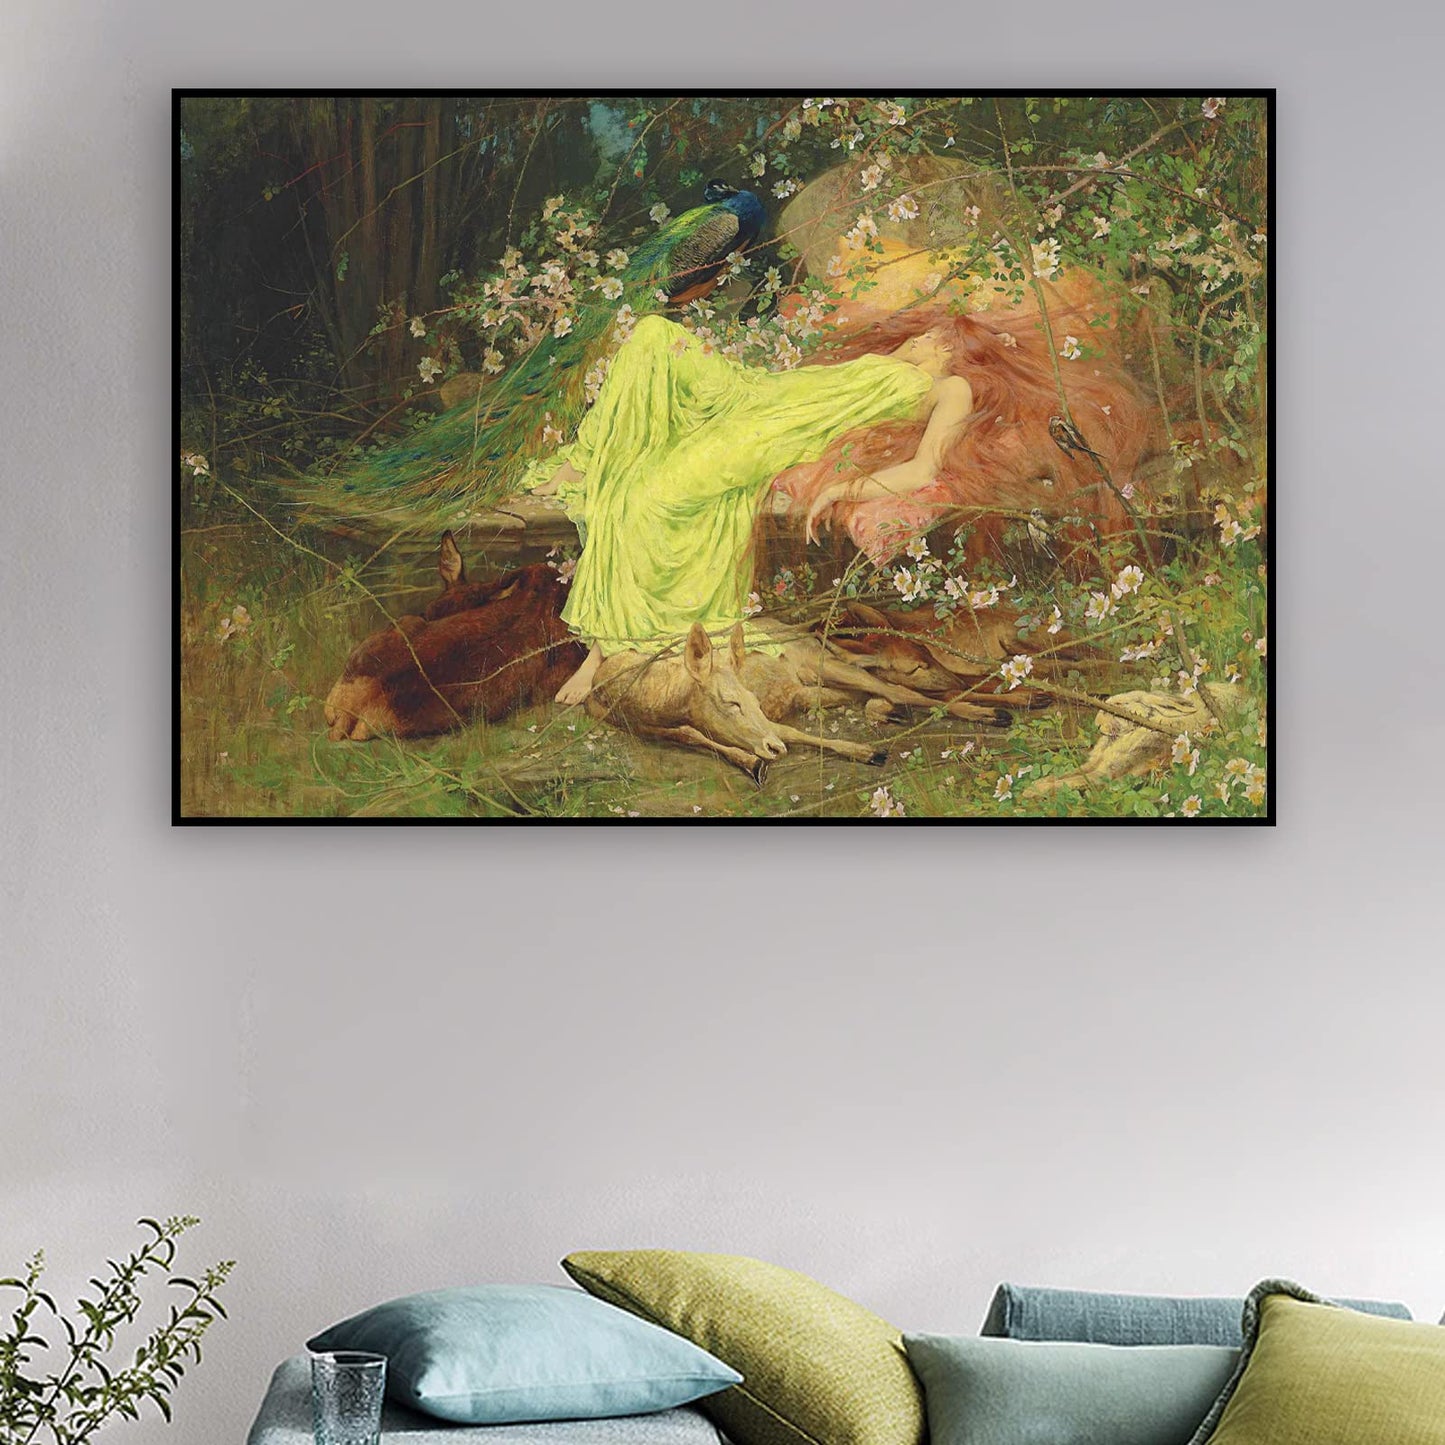 ZZPT Forest Canvas Wall Art - A Fairy Tale Print by Arthur Wardle - Fairy Fantasy Pictures Aesthetics Poster Animal Wall Decor for Kids Room Bedroom Unframed (12x18in/30x45cm)